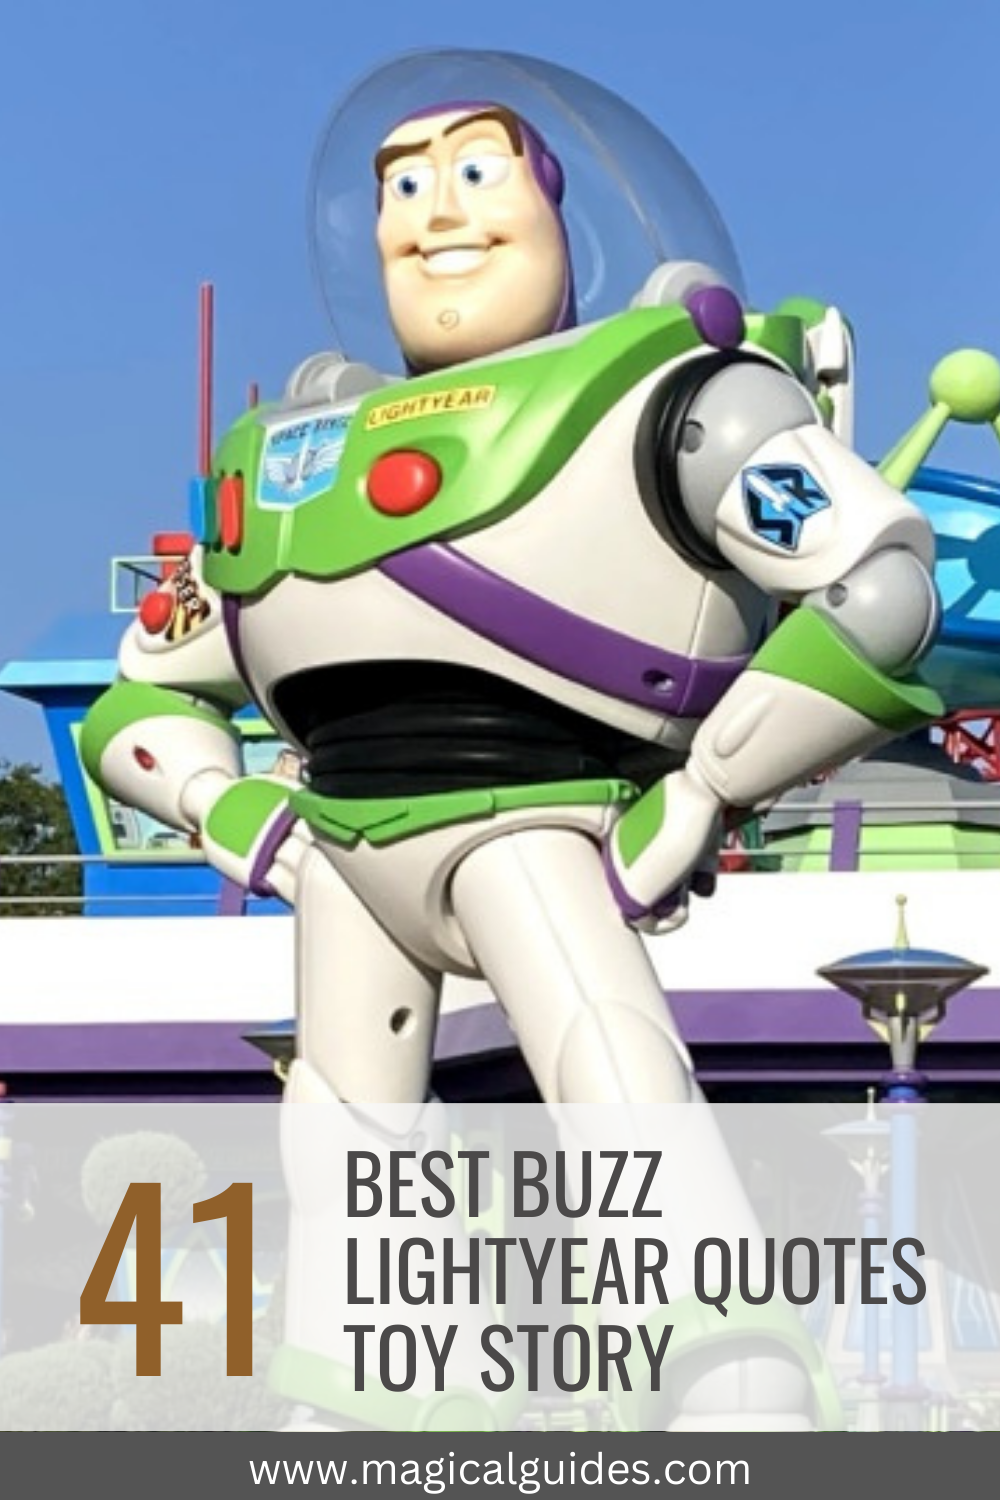 All of the Buzz Lightyear Quotes for Toy Story fans. 
Toy Story Quotes Inspirational, Toy Story Quotes Love, Toy Story Quotes Friendship, Toy Story Quotes Funny. Buzz Lightyear Quotes Funny.